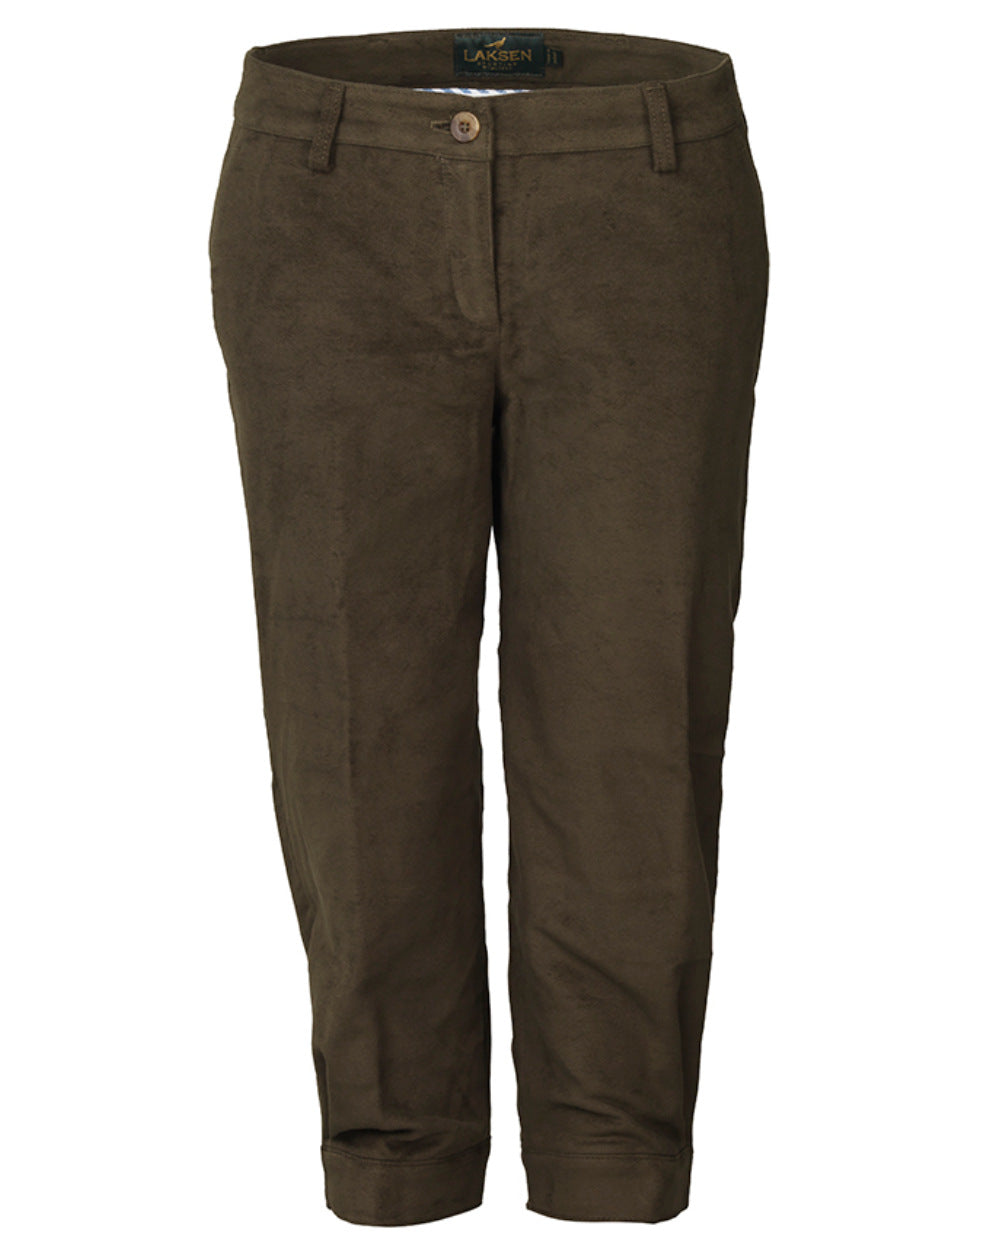 Loden Coloured Laksen Lady Belgravia Breeks On A White Background 